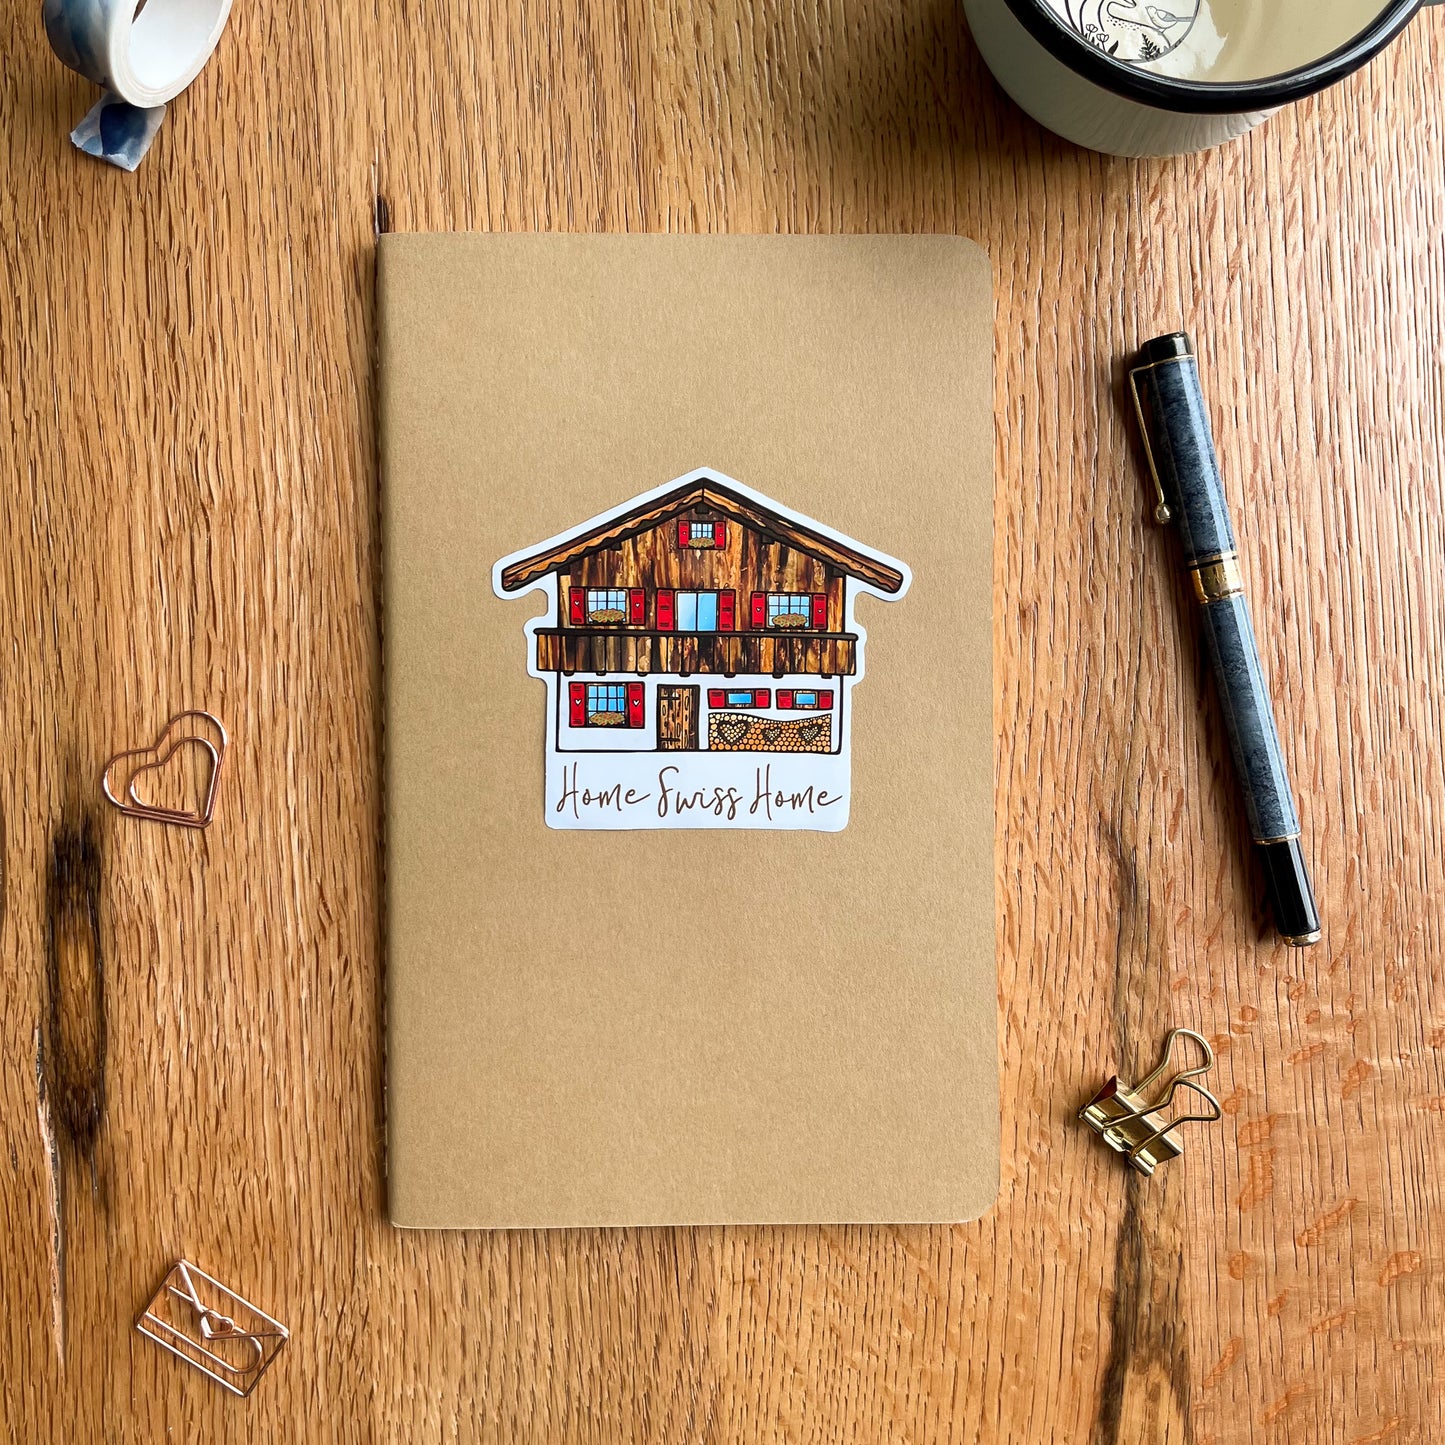 Adorn your travel journal with this lovely vinyl sticker depicting a dreamy Swiss Chalet - the perfect memento from your travels in Switzerland.